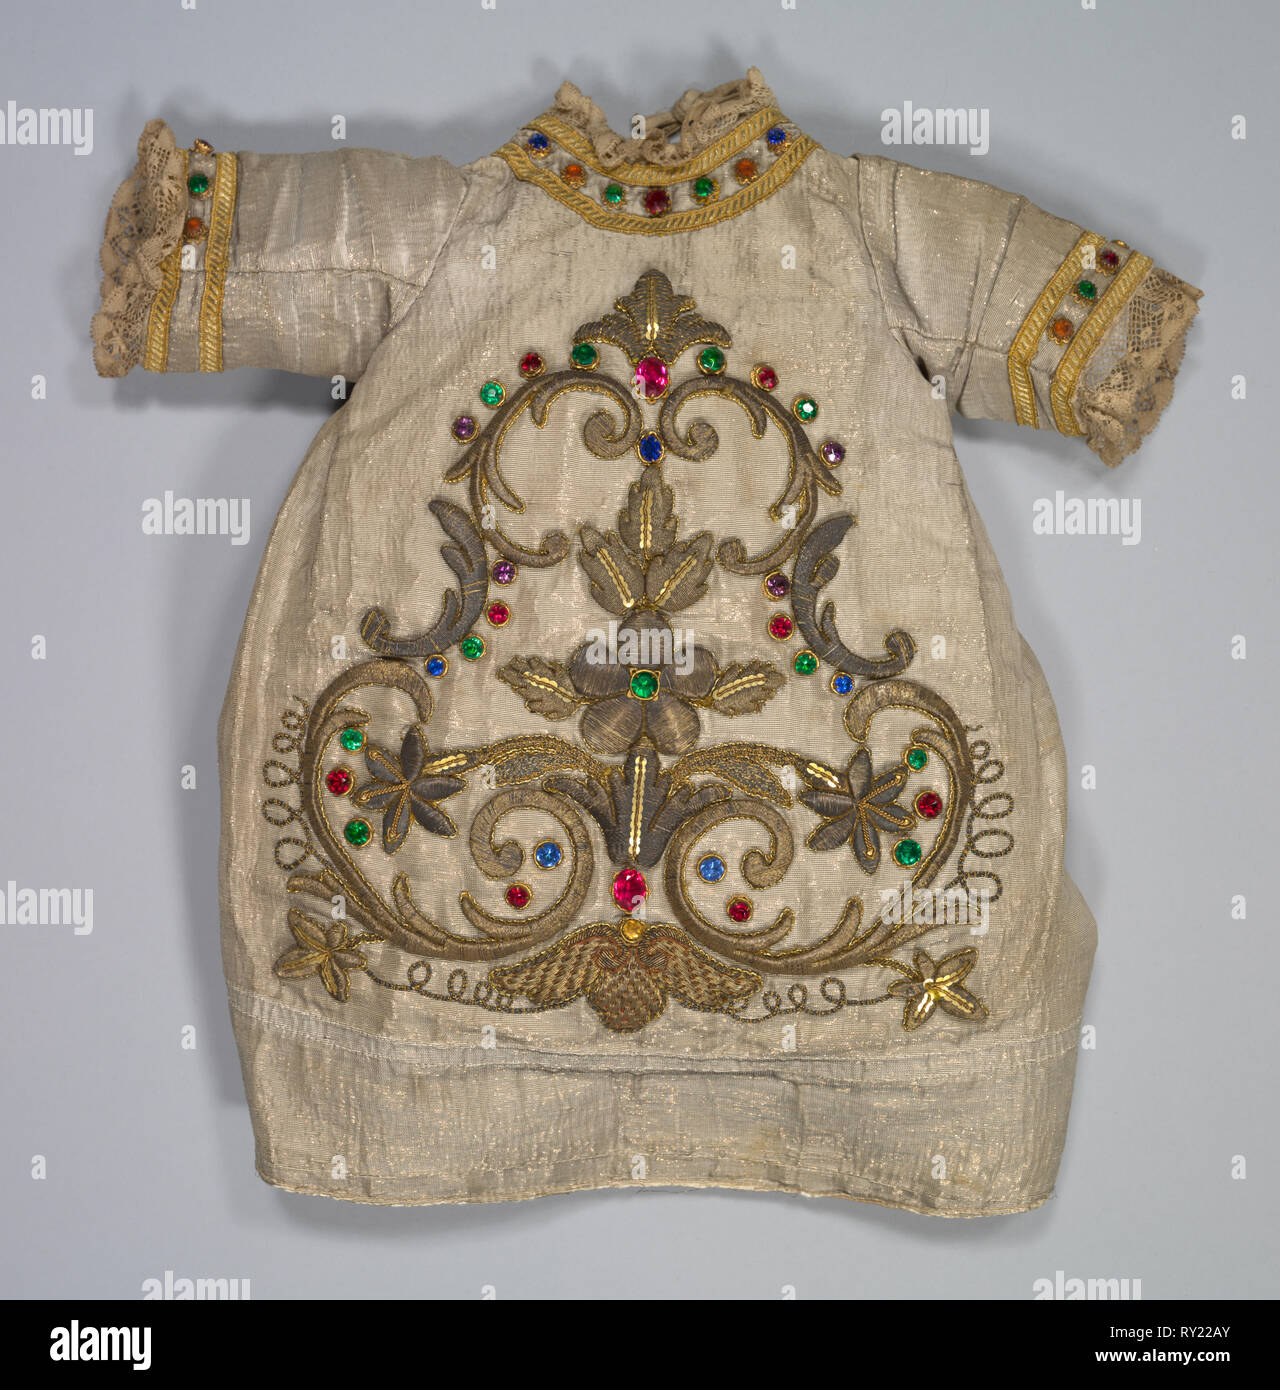 Baby's Robe, 17th century. Spain, 17th century. Cloth embroidererd in gold and silver; overall: 35 x 31 cm (13 3/4 x 12 3/16 in Stock Photo